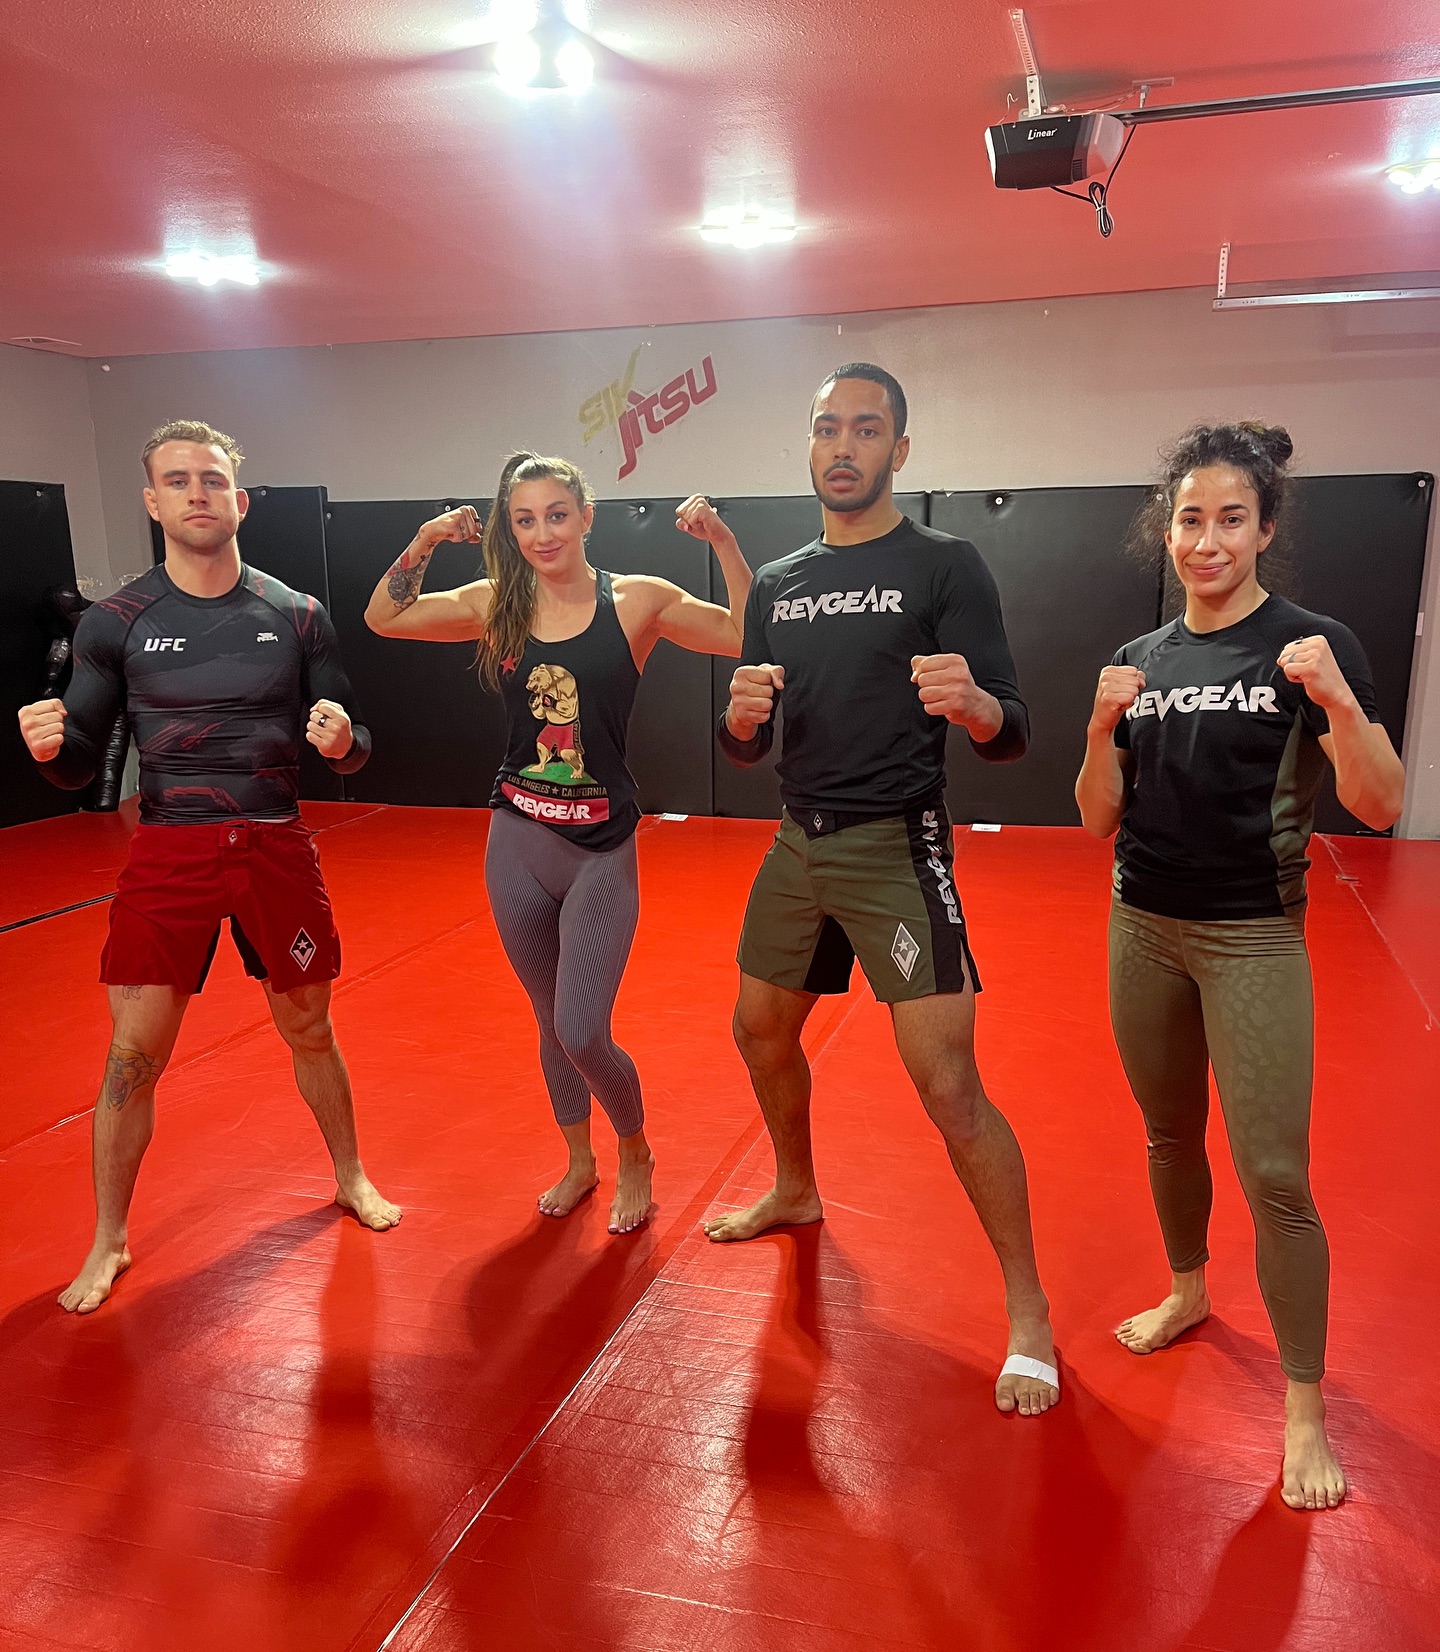 Ready for action!!! Its rad to be alongside such high level athletes, all with the same vision to climb the ranks to be the best. @ashkicka333 fights May 9 @bflmma - @melissa.amaya27 July 8 @combateglobal - @brady_bambam July 15 @ufc - 
I’m working to grow 1% stronger and smarter daily. One day I’ll get this Fight IQ thing down. 🤗 #revgear #sikjitsu